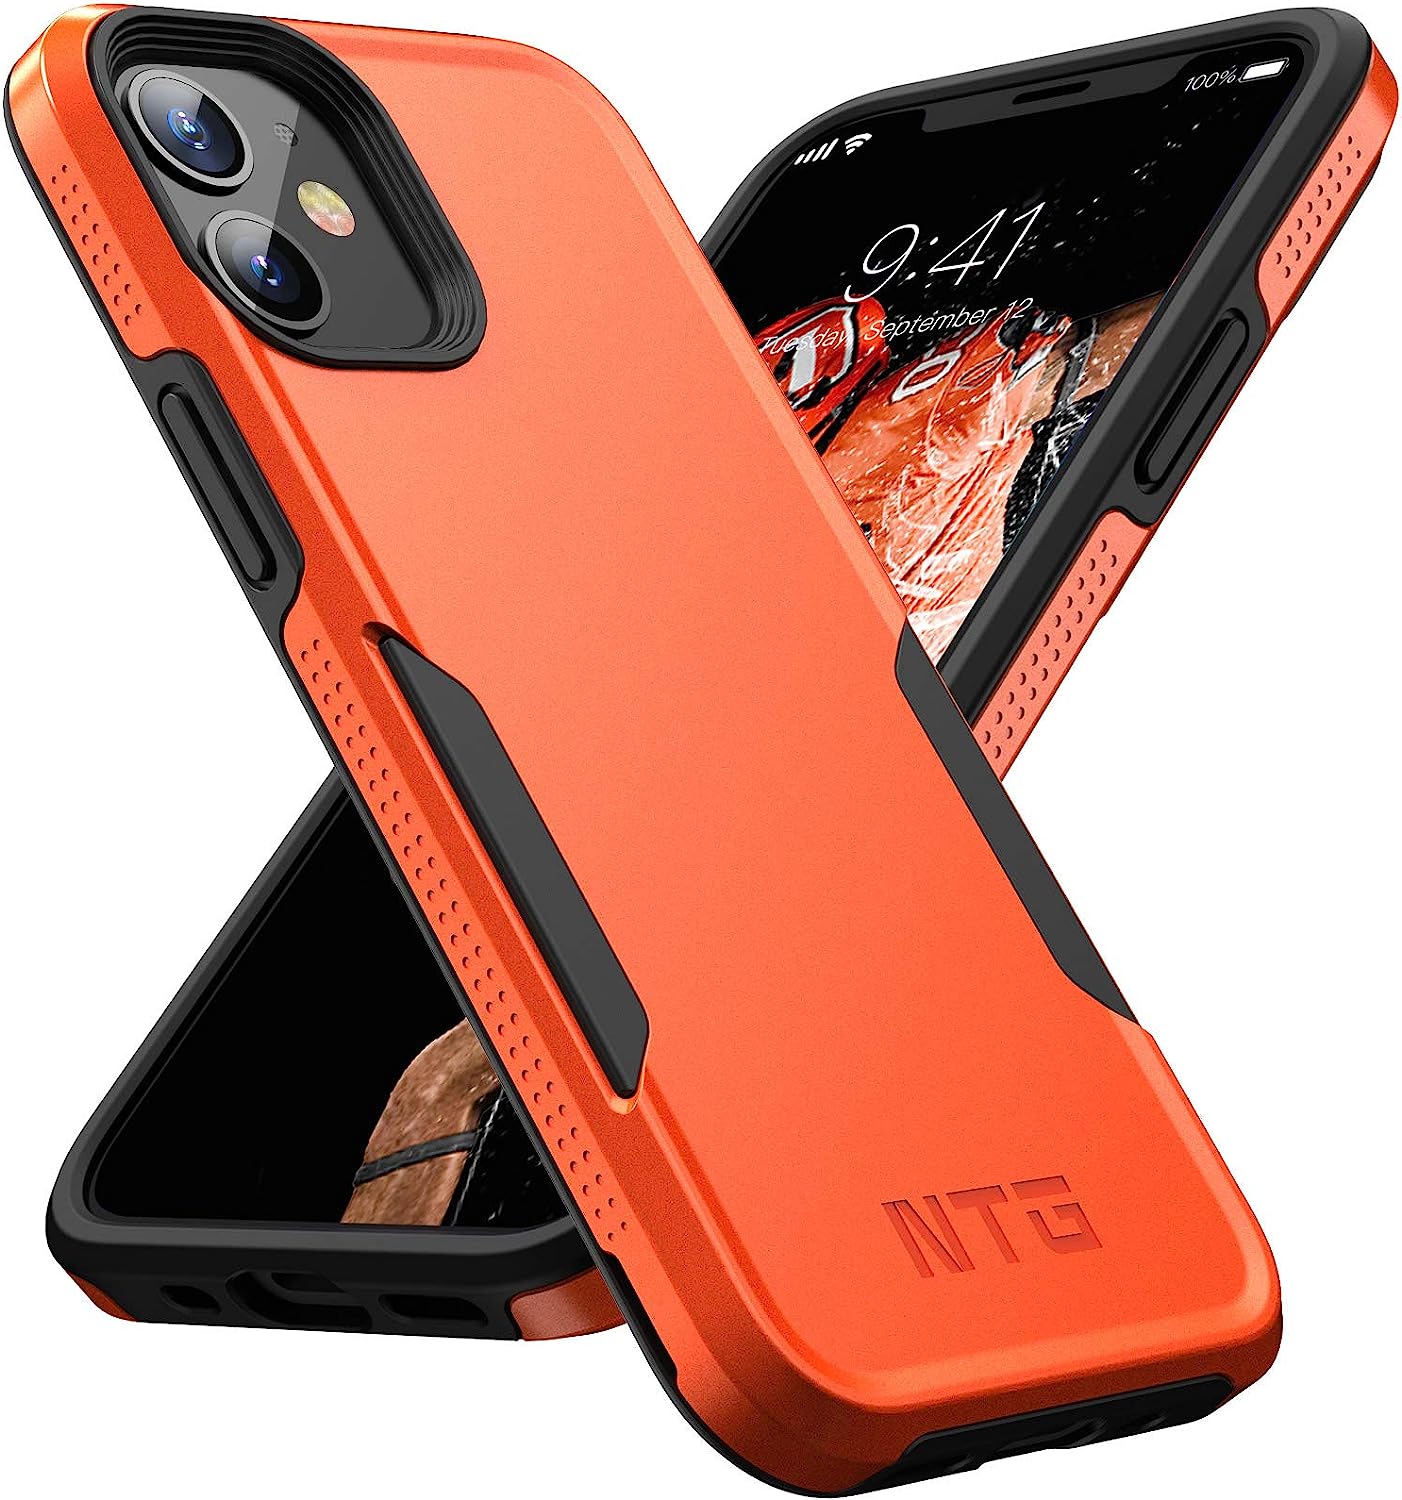 NTG 1st Generation Designed for iPhone 13 Pro Max Case RRP 6.99 CLEARANCE XL 5.99